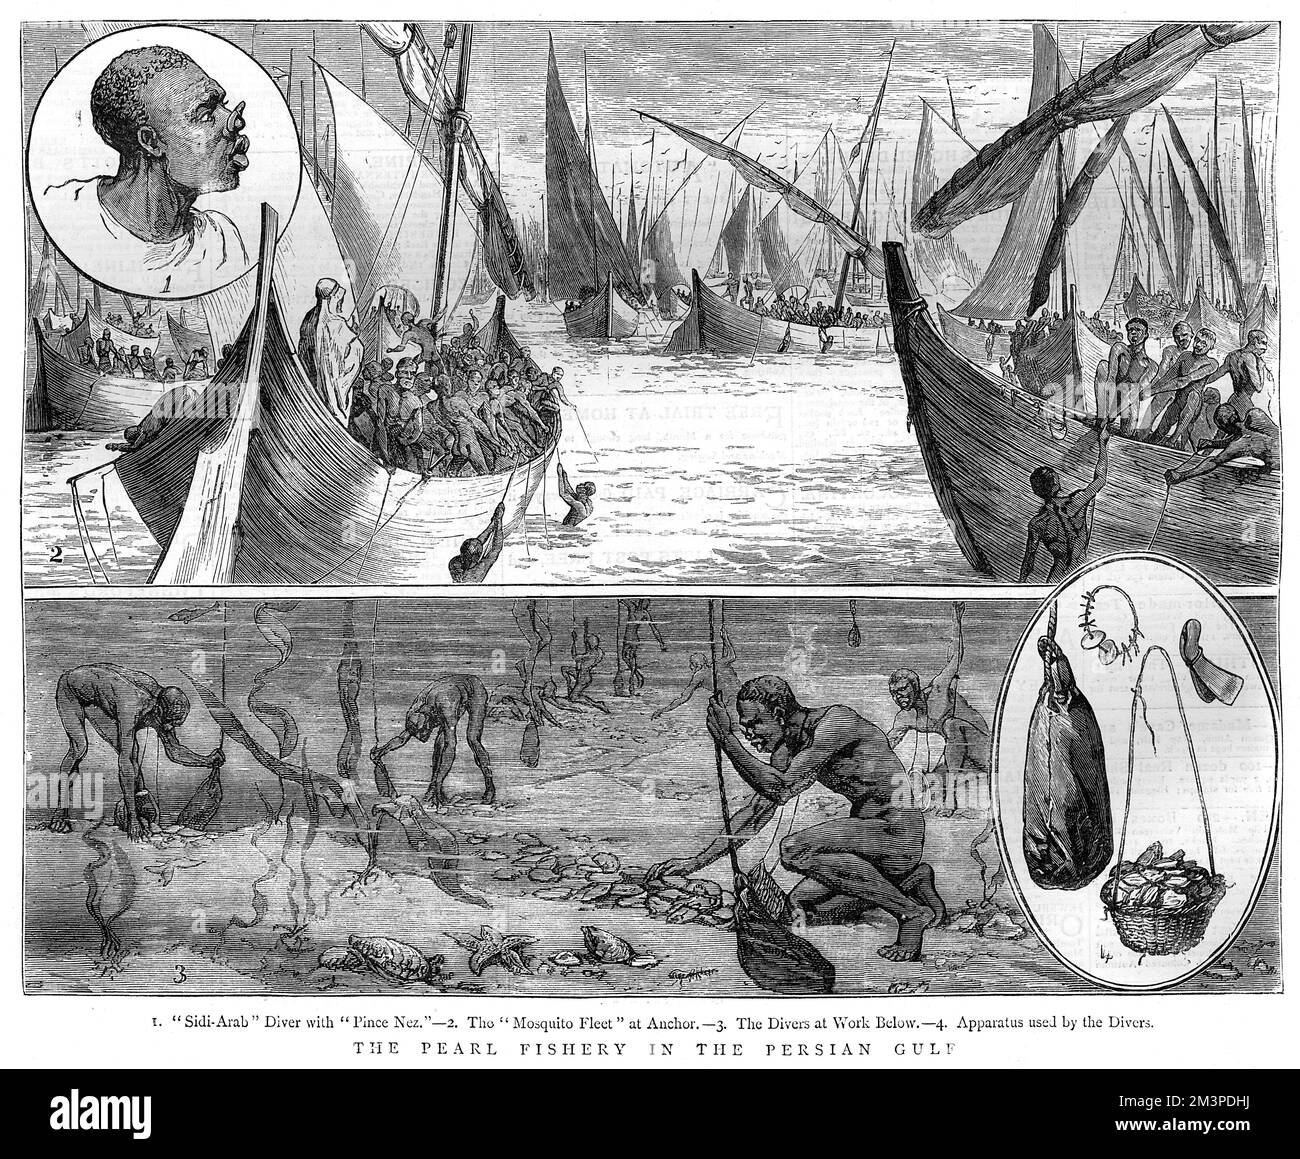 The Pearl Fishery in the Persian Gulf. Sidi-Arab diver with pince-nez. The Mosquito Fleet at anchor. The divers at work below. Apparatus used by the divers.     Date: 1881 Stock Photo